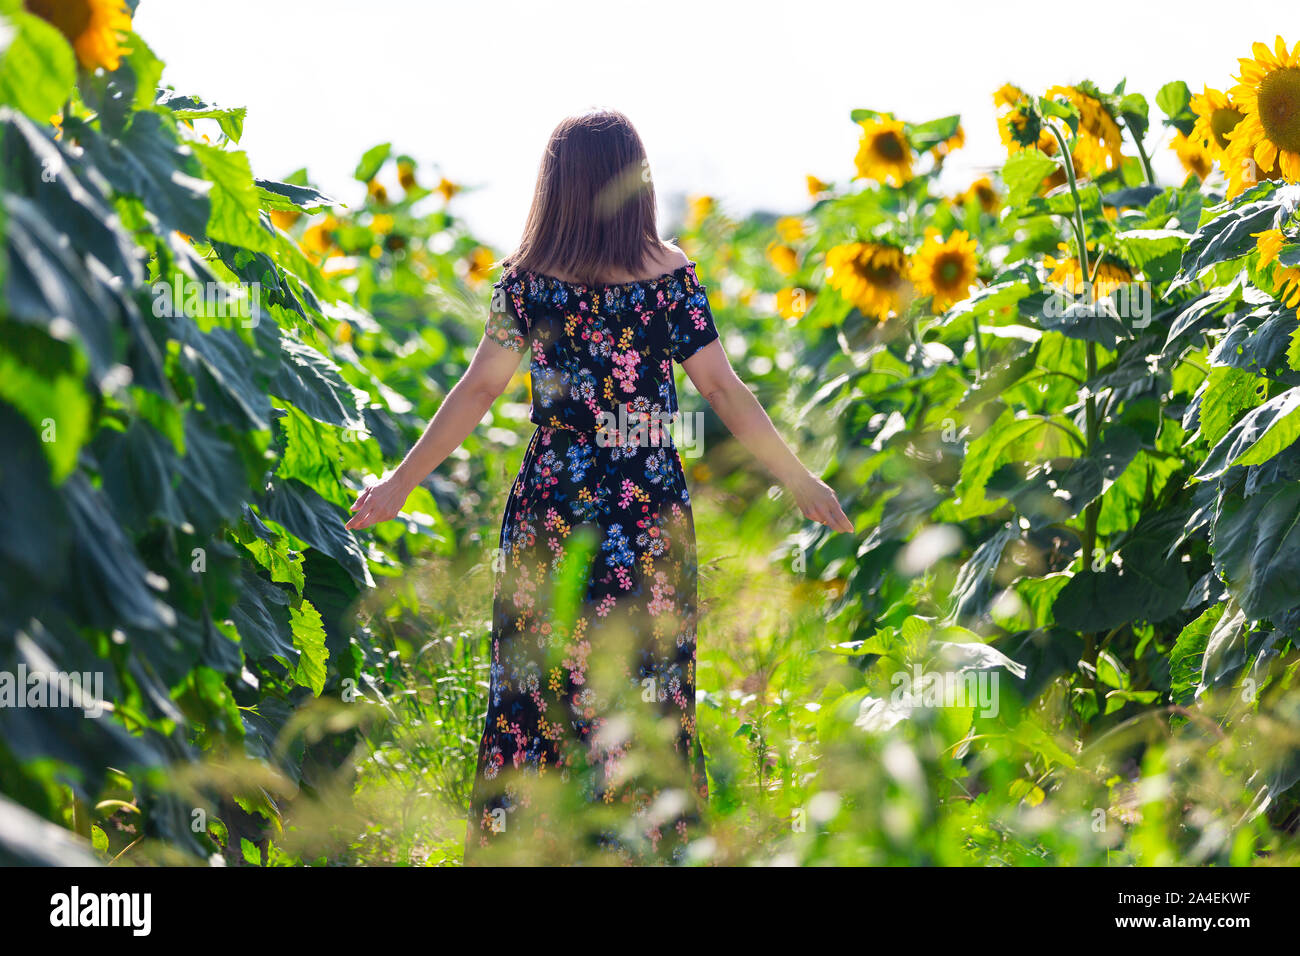 The woman from behind in a field of sunflowers Stock Photo